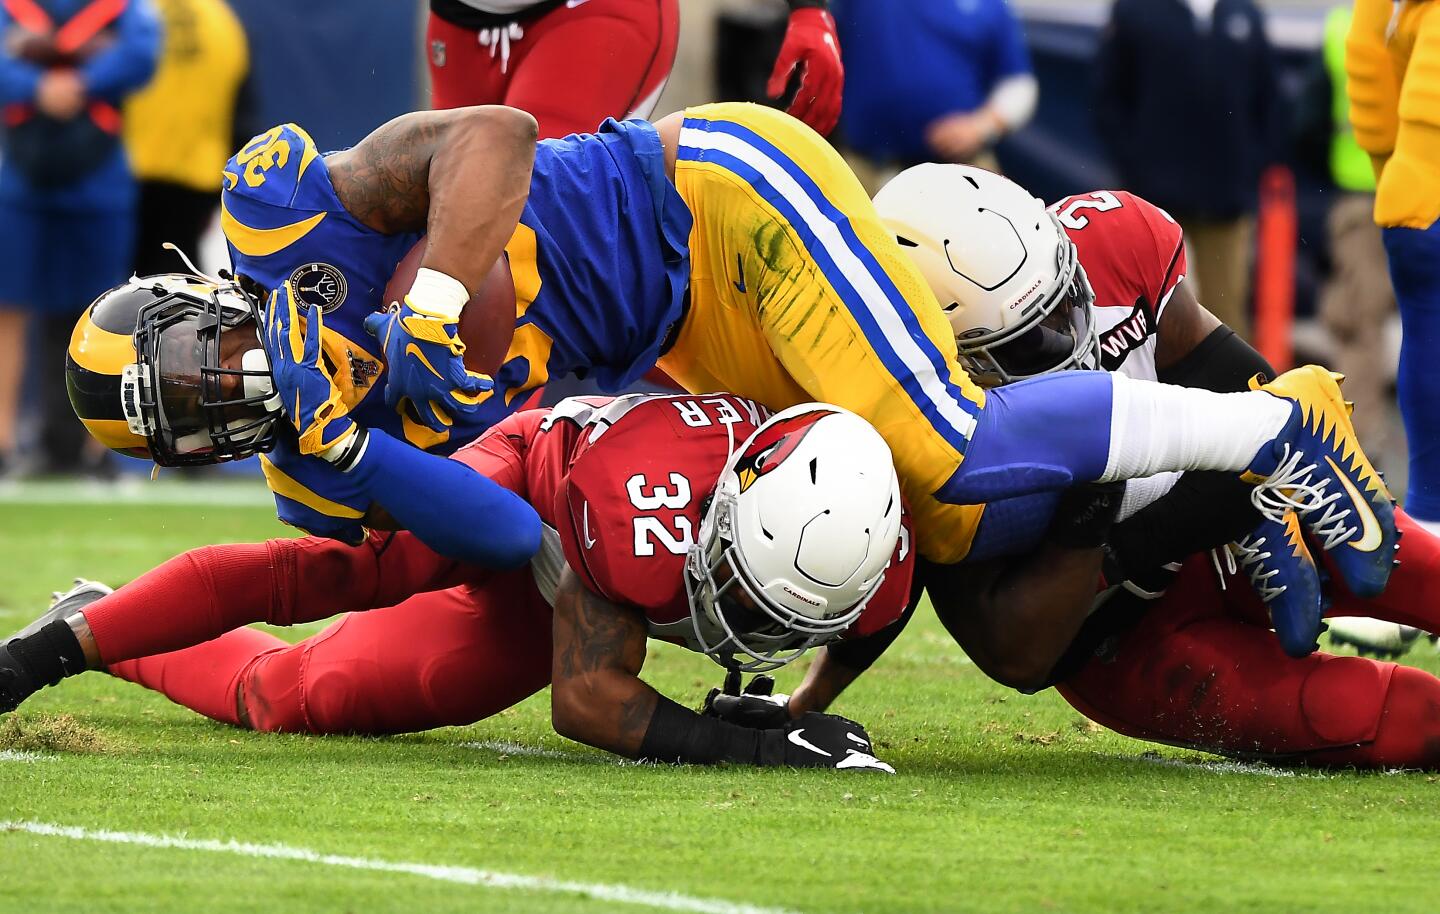 Rams running back Todd Gurley is stopped short of the goal line by Arizona Cardinals safety Budda Baker (32) and cornerback Patrick Peterson during the second quarter.